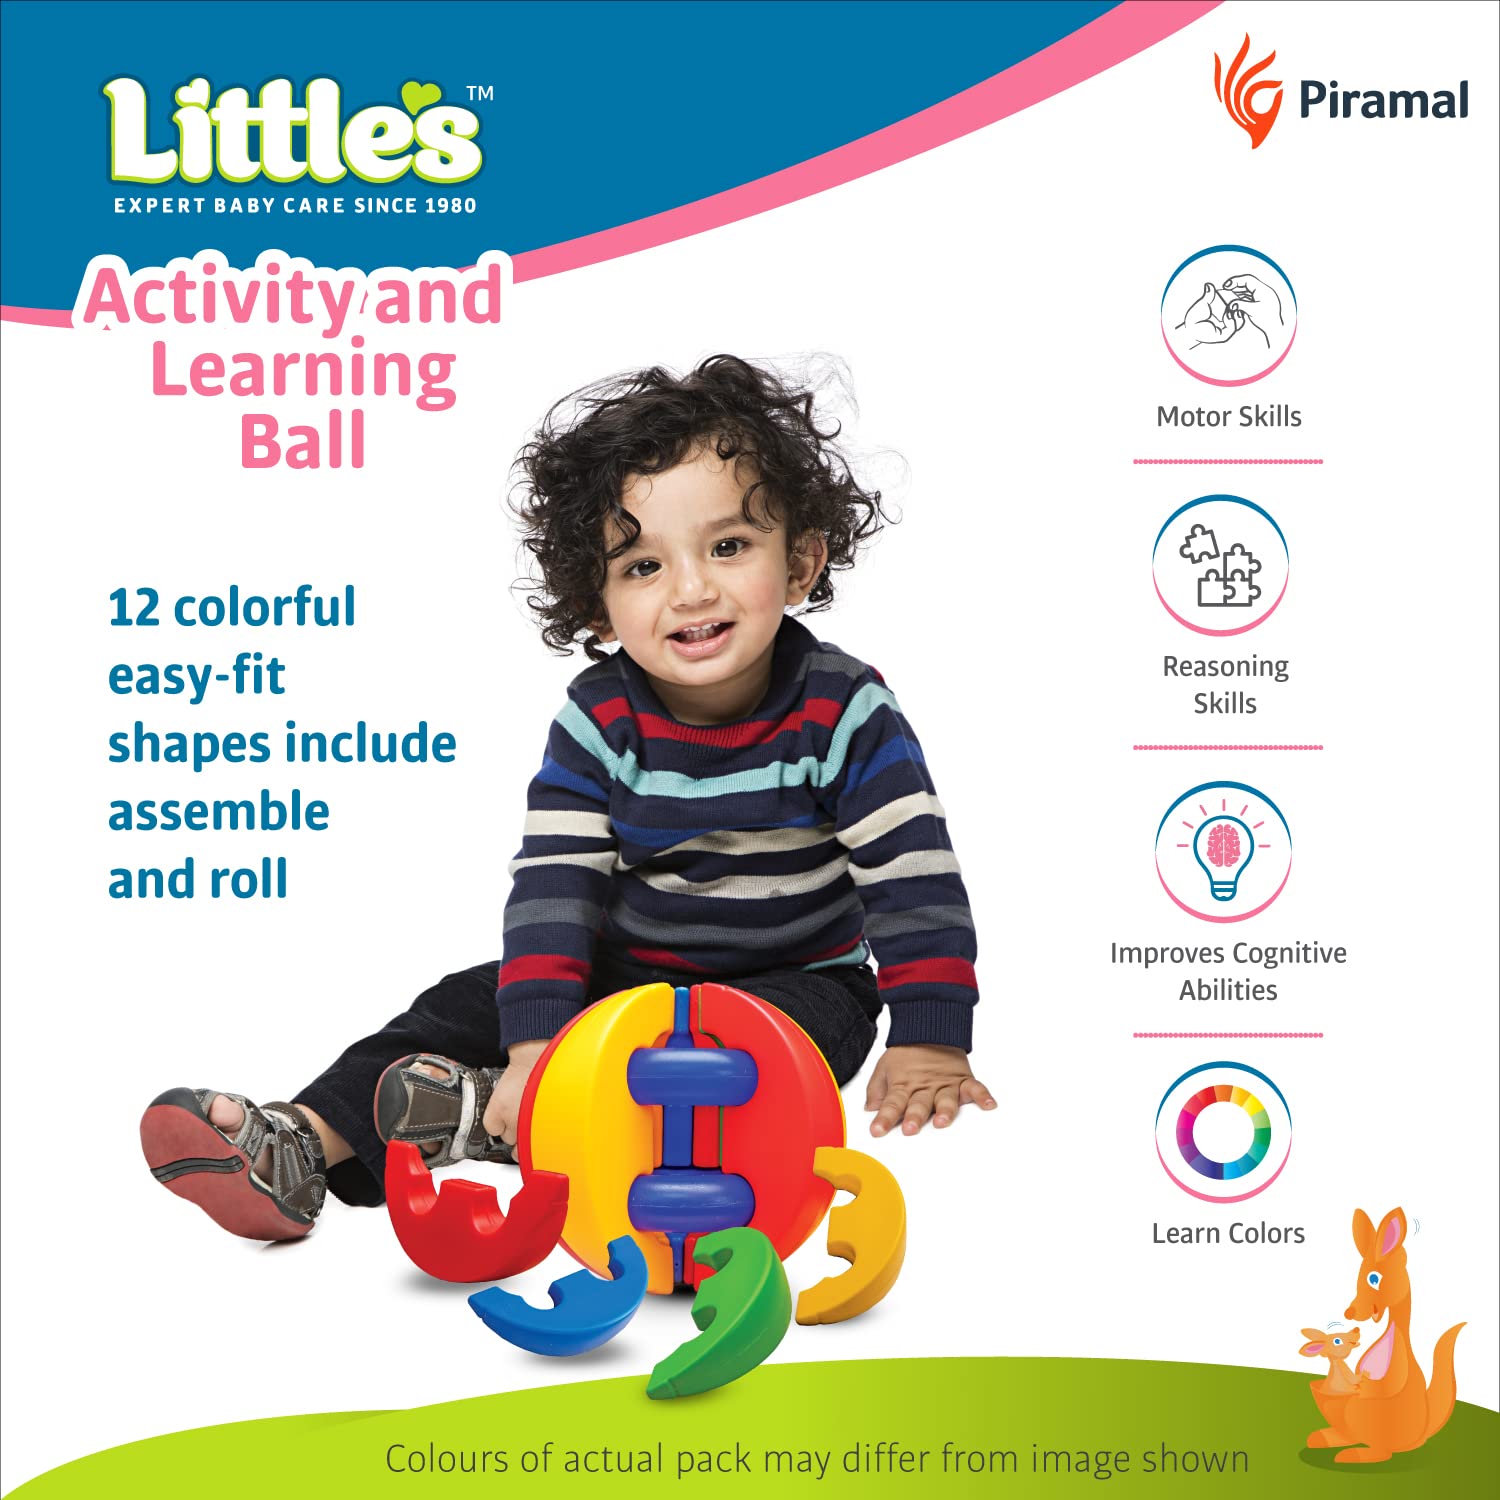 Littles activity and learning ball